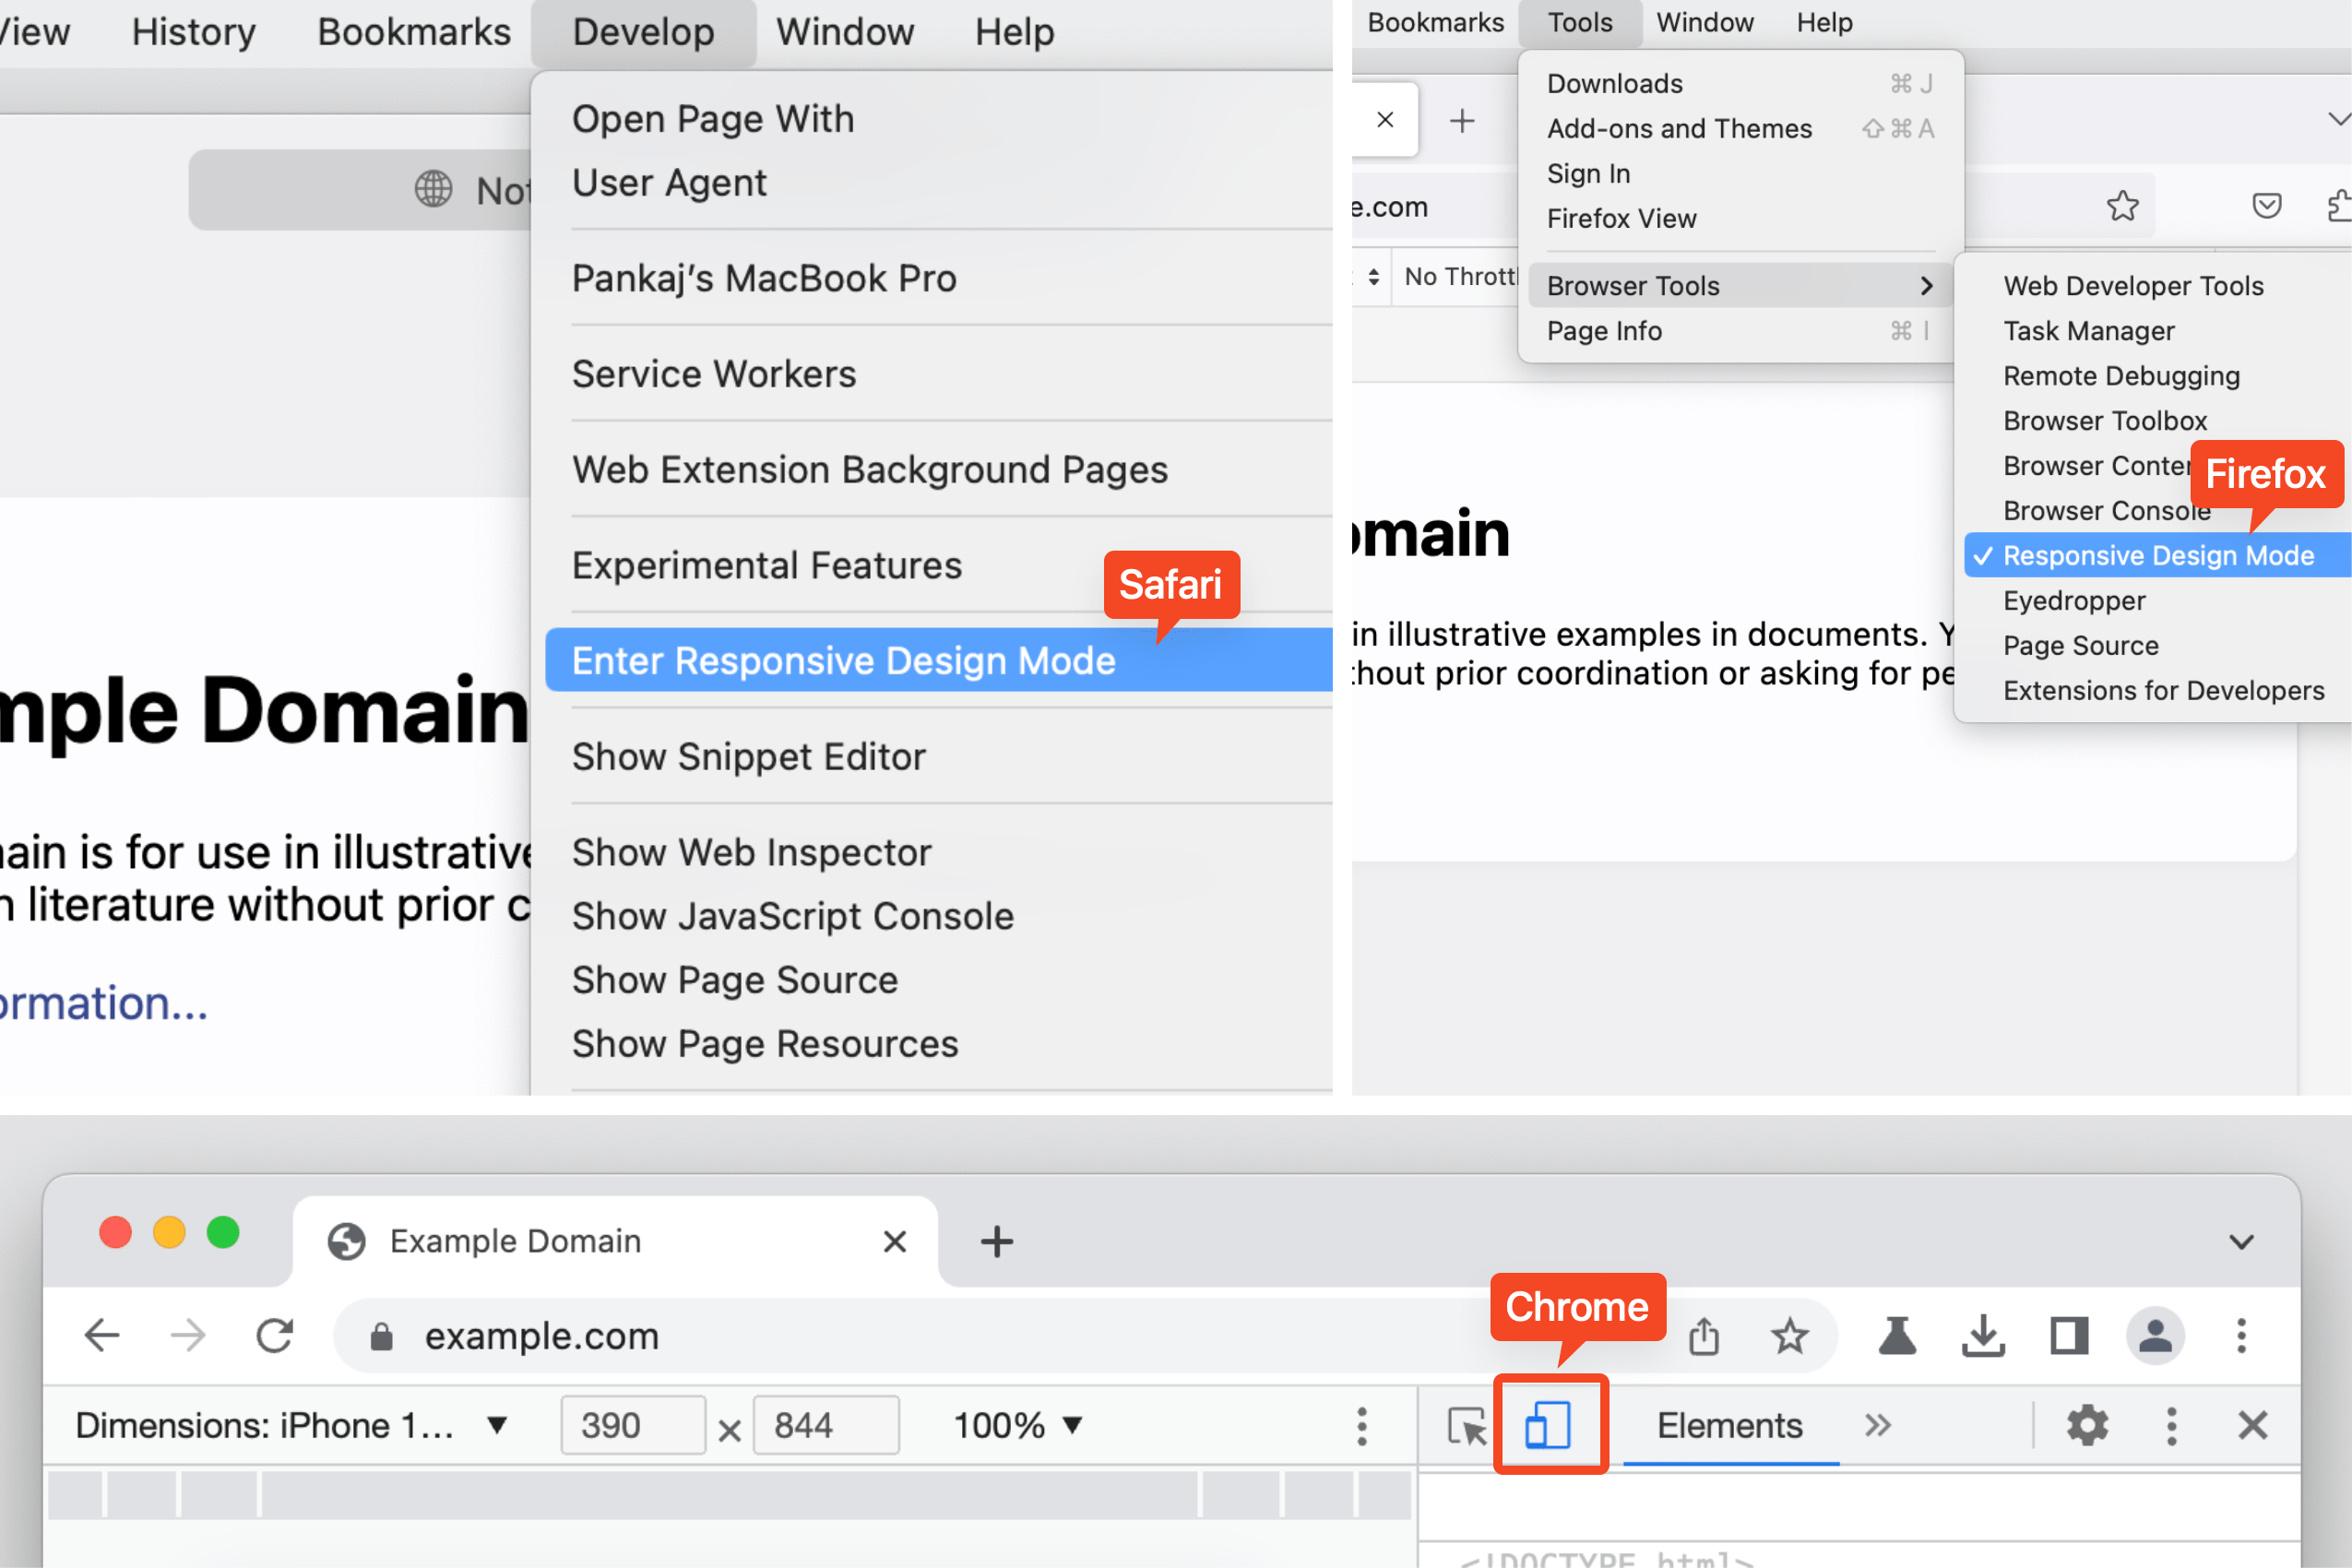 Enter responsive mode options in DevTools for all three browsers.